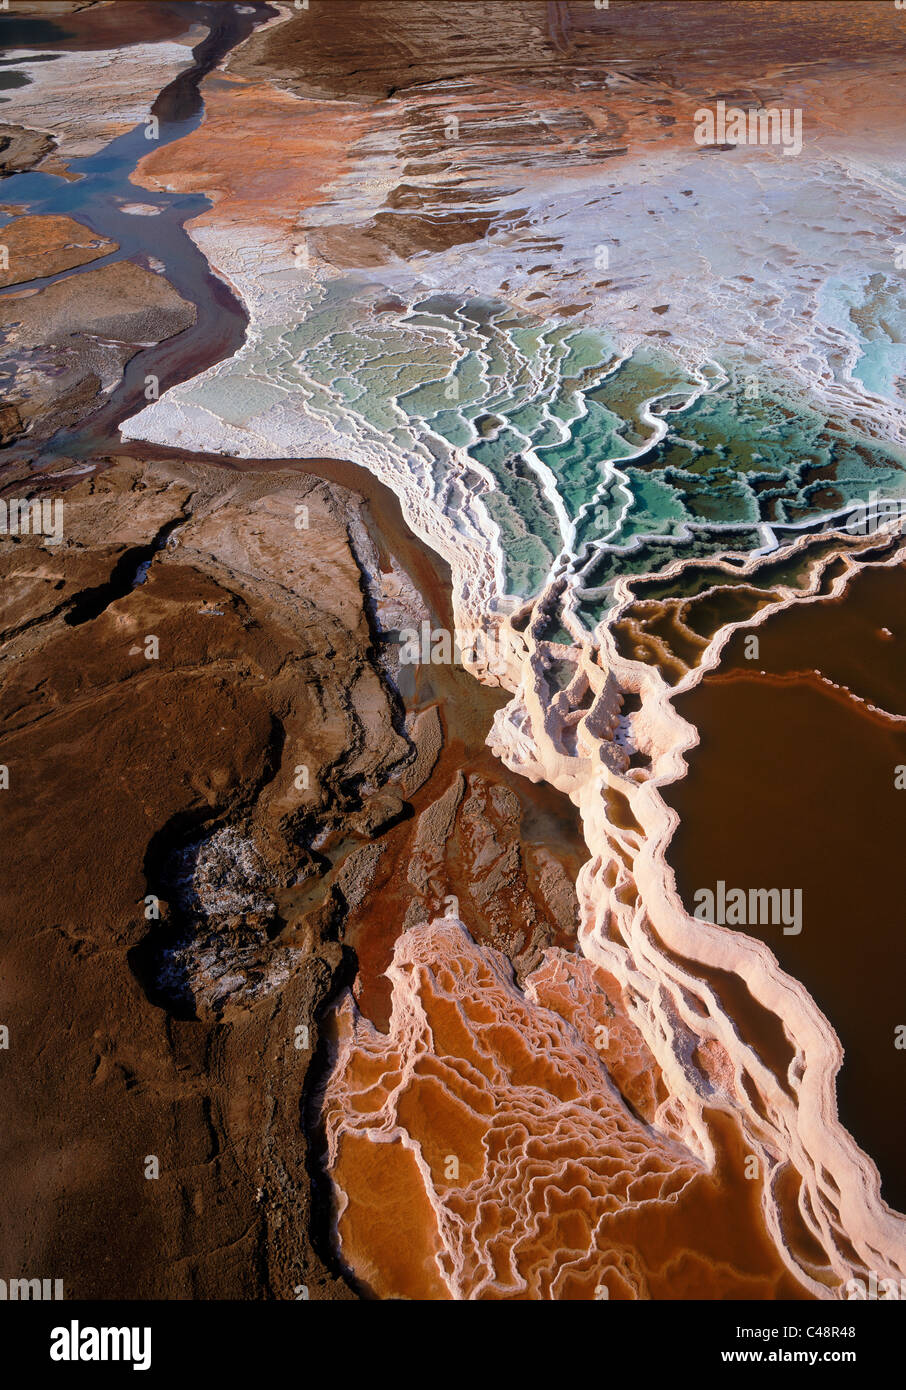 Abstract view of the salt crystals in the Dead sea Stock Photo